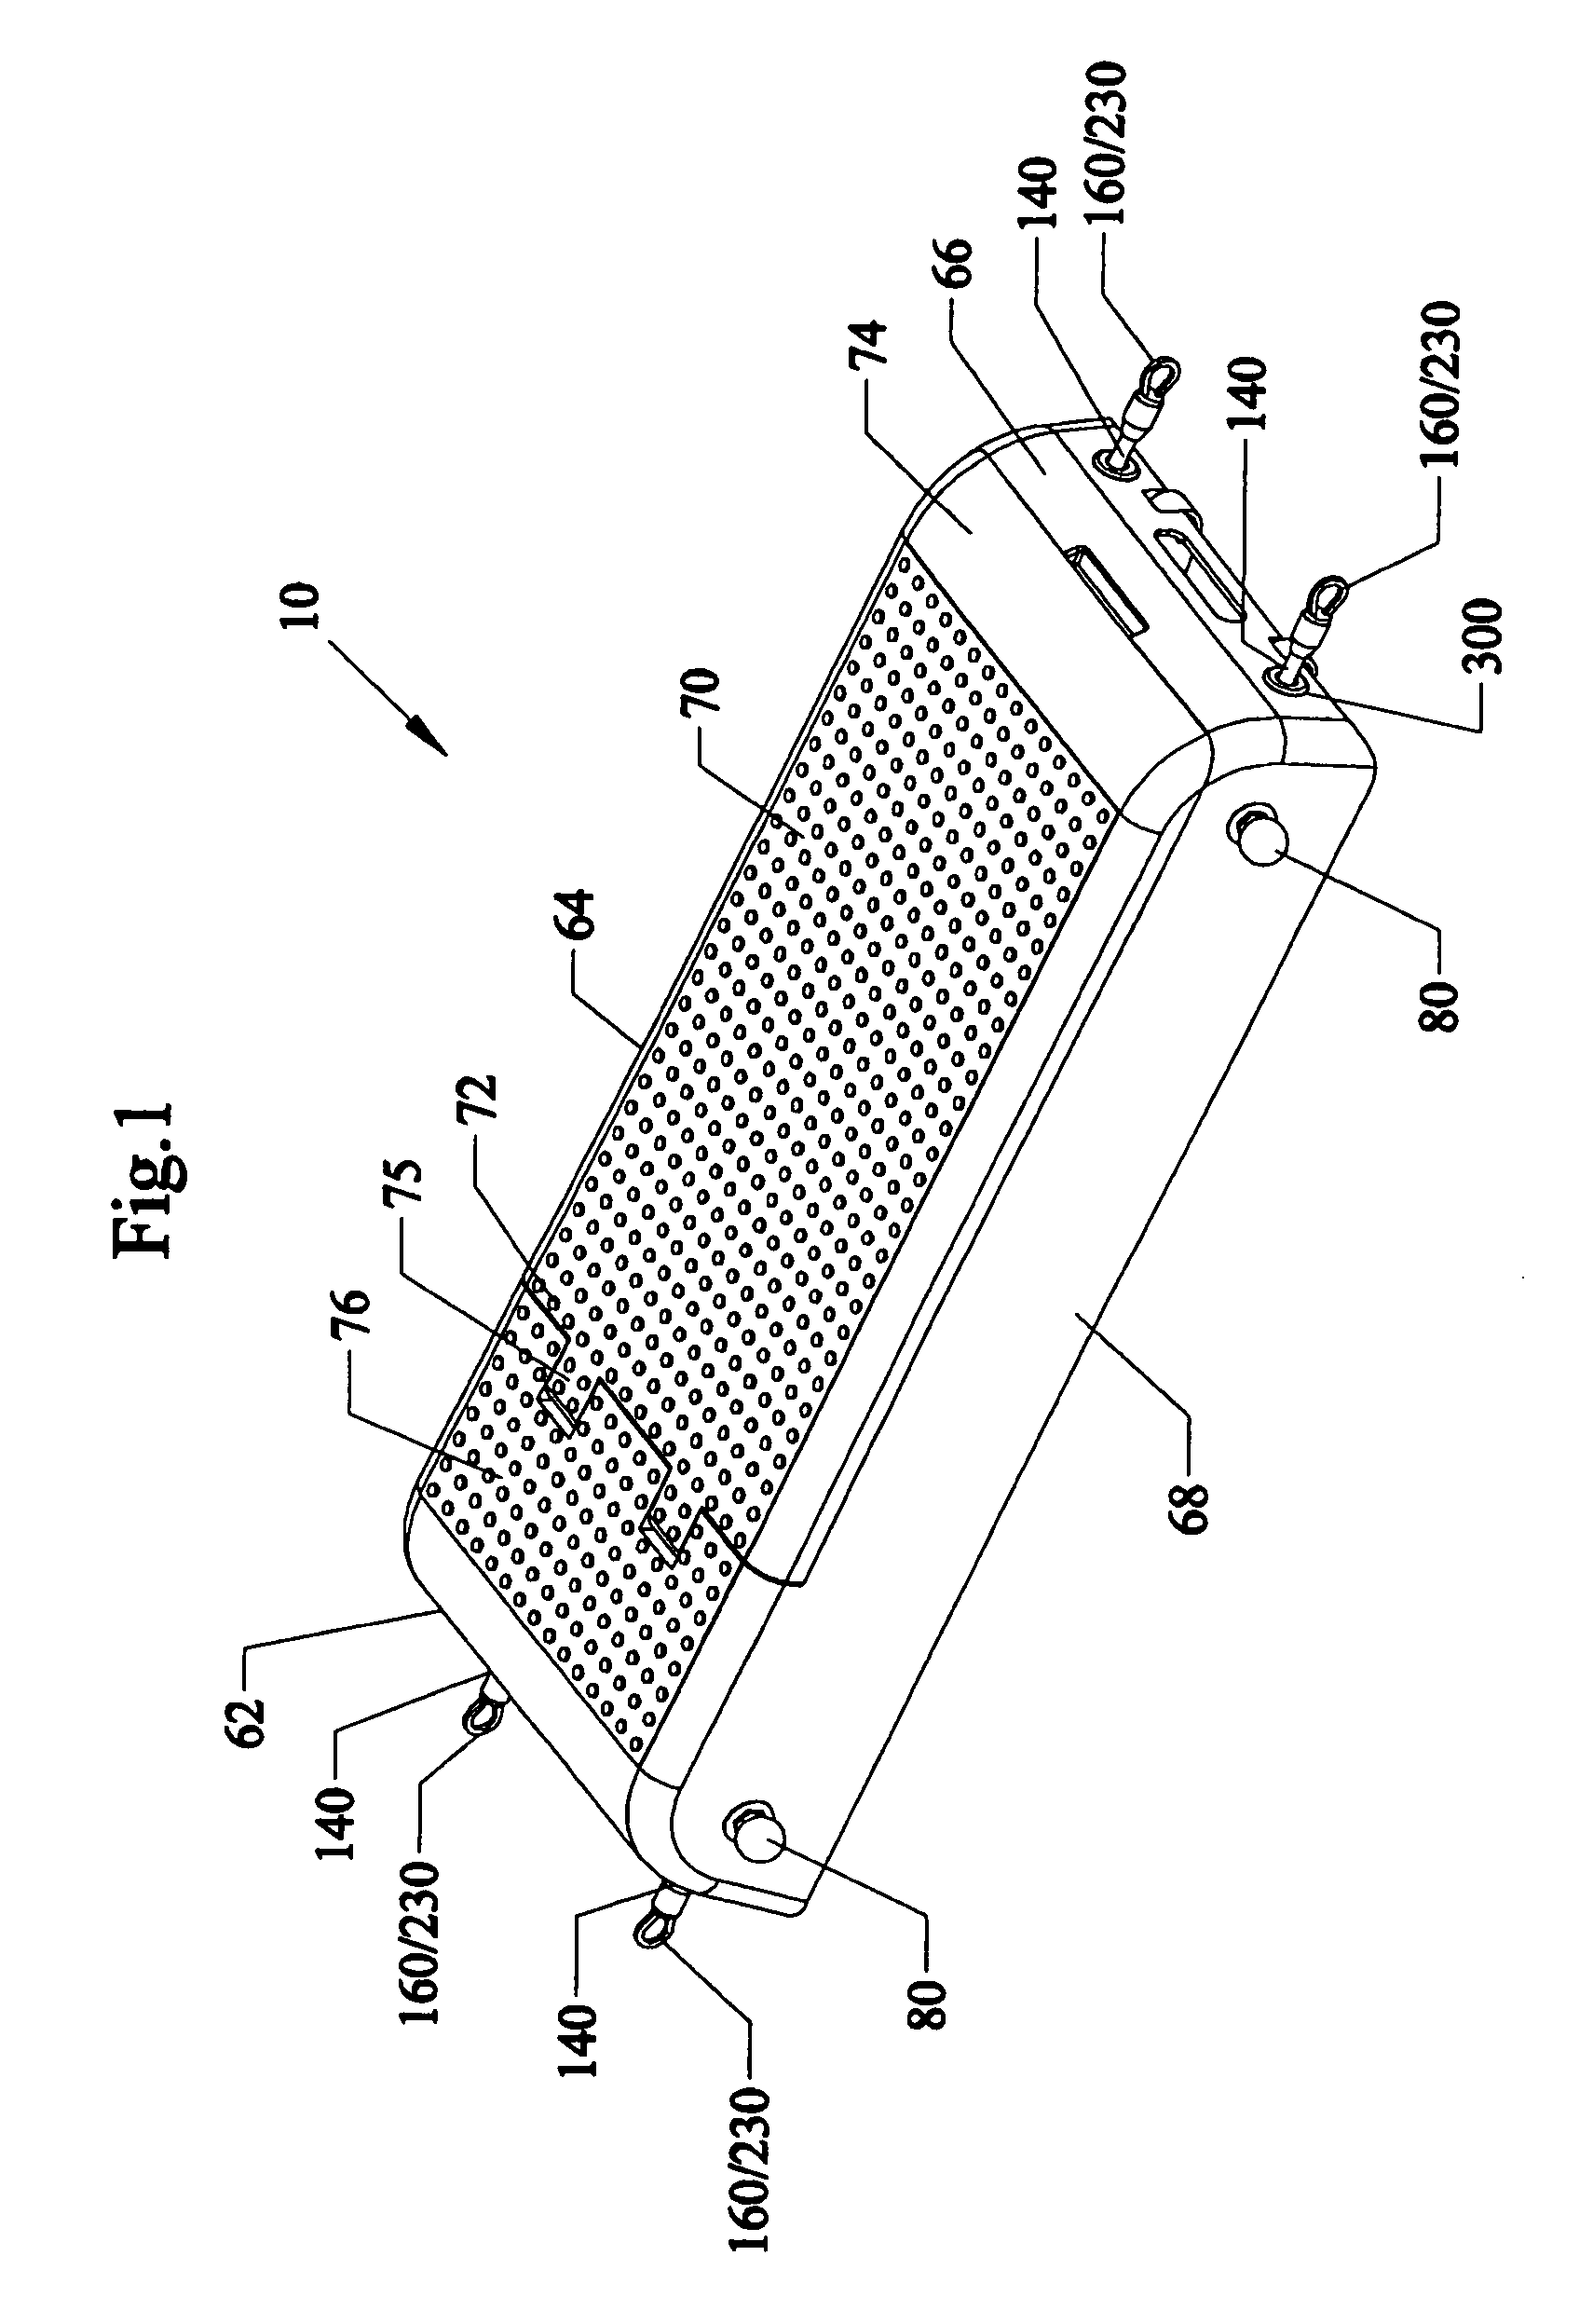 Portable convertible multifunction exercise apparatus and method